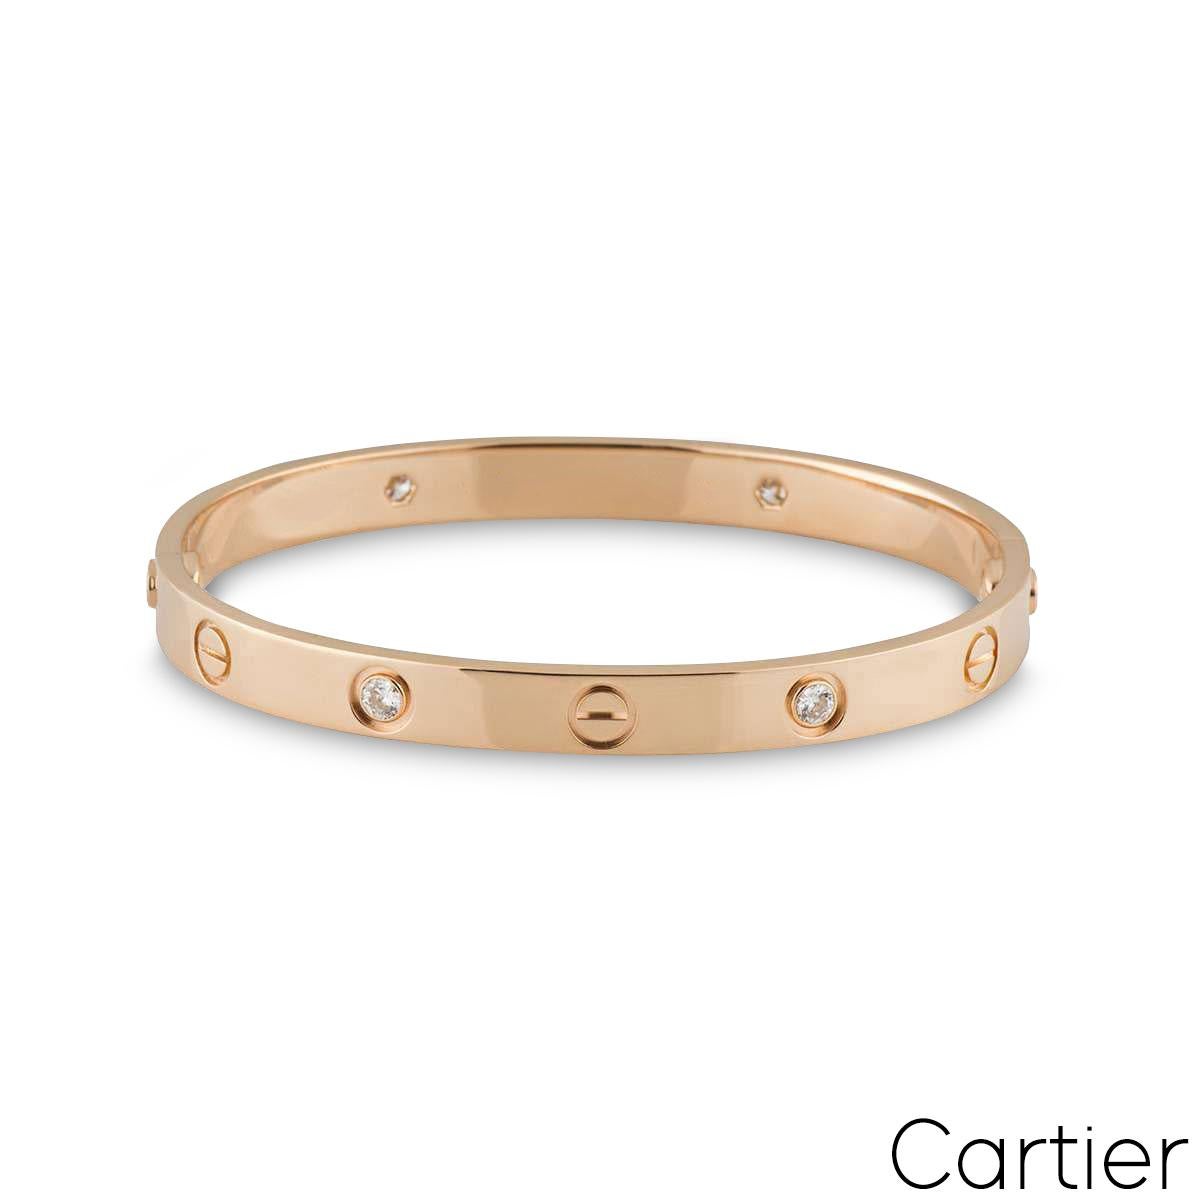 An 18k rose gold half diamond Cartier bracelet from the Love collection. The iconic screw motif alternates with 4 round brilliant cut diamonds on the outer edge of the bracelet totalling 0.42ct. The bracelet is a size 17 and features the new style